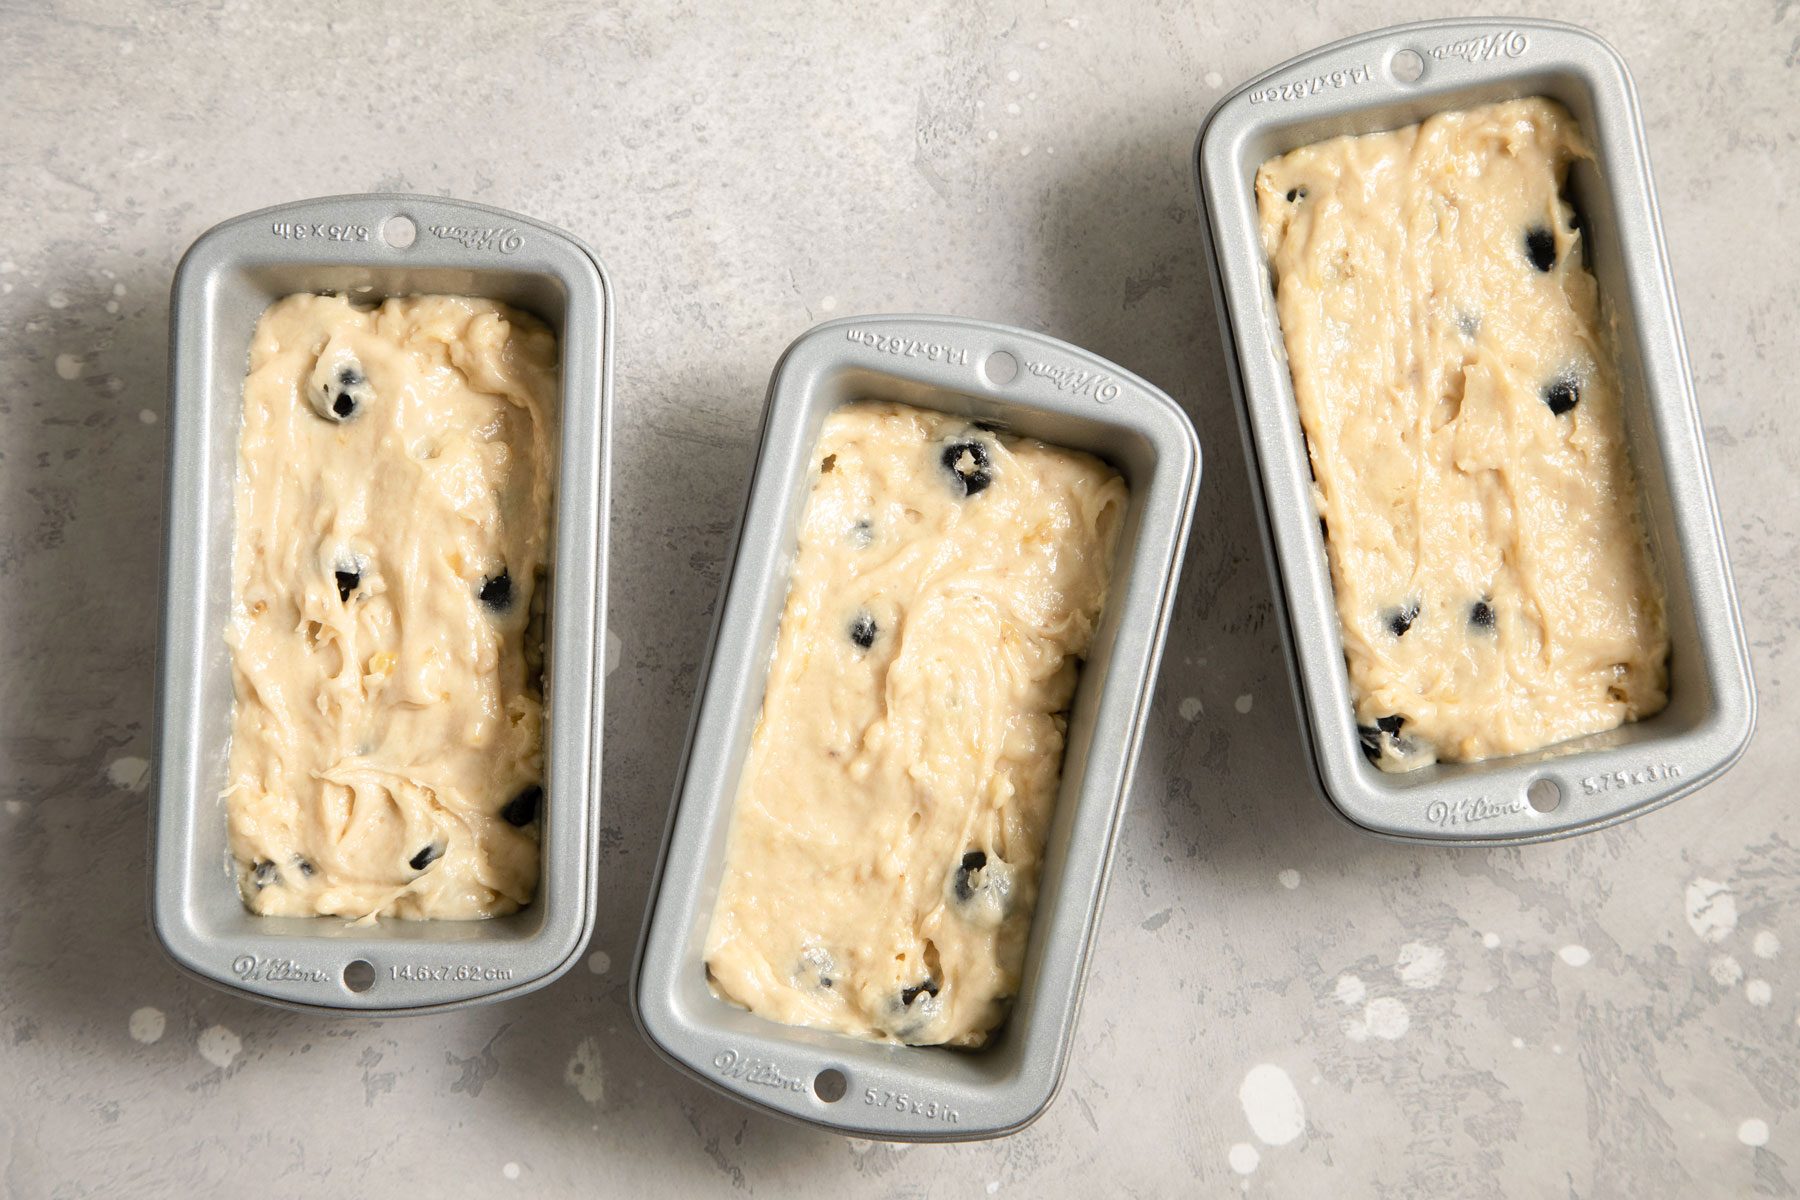 Blueberry Banana Bread batter poured into three greased loaf pans